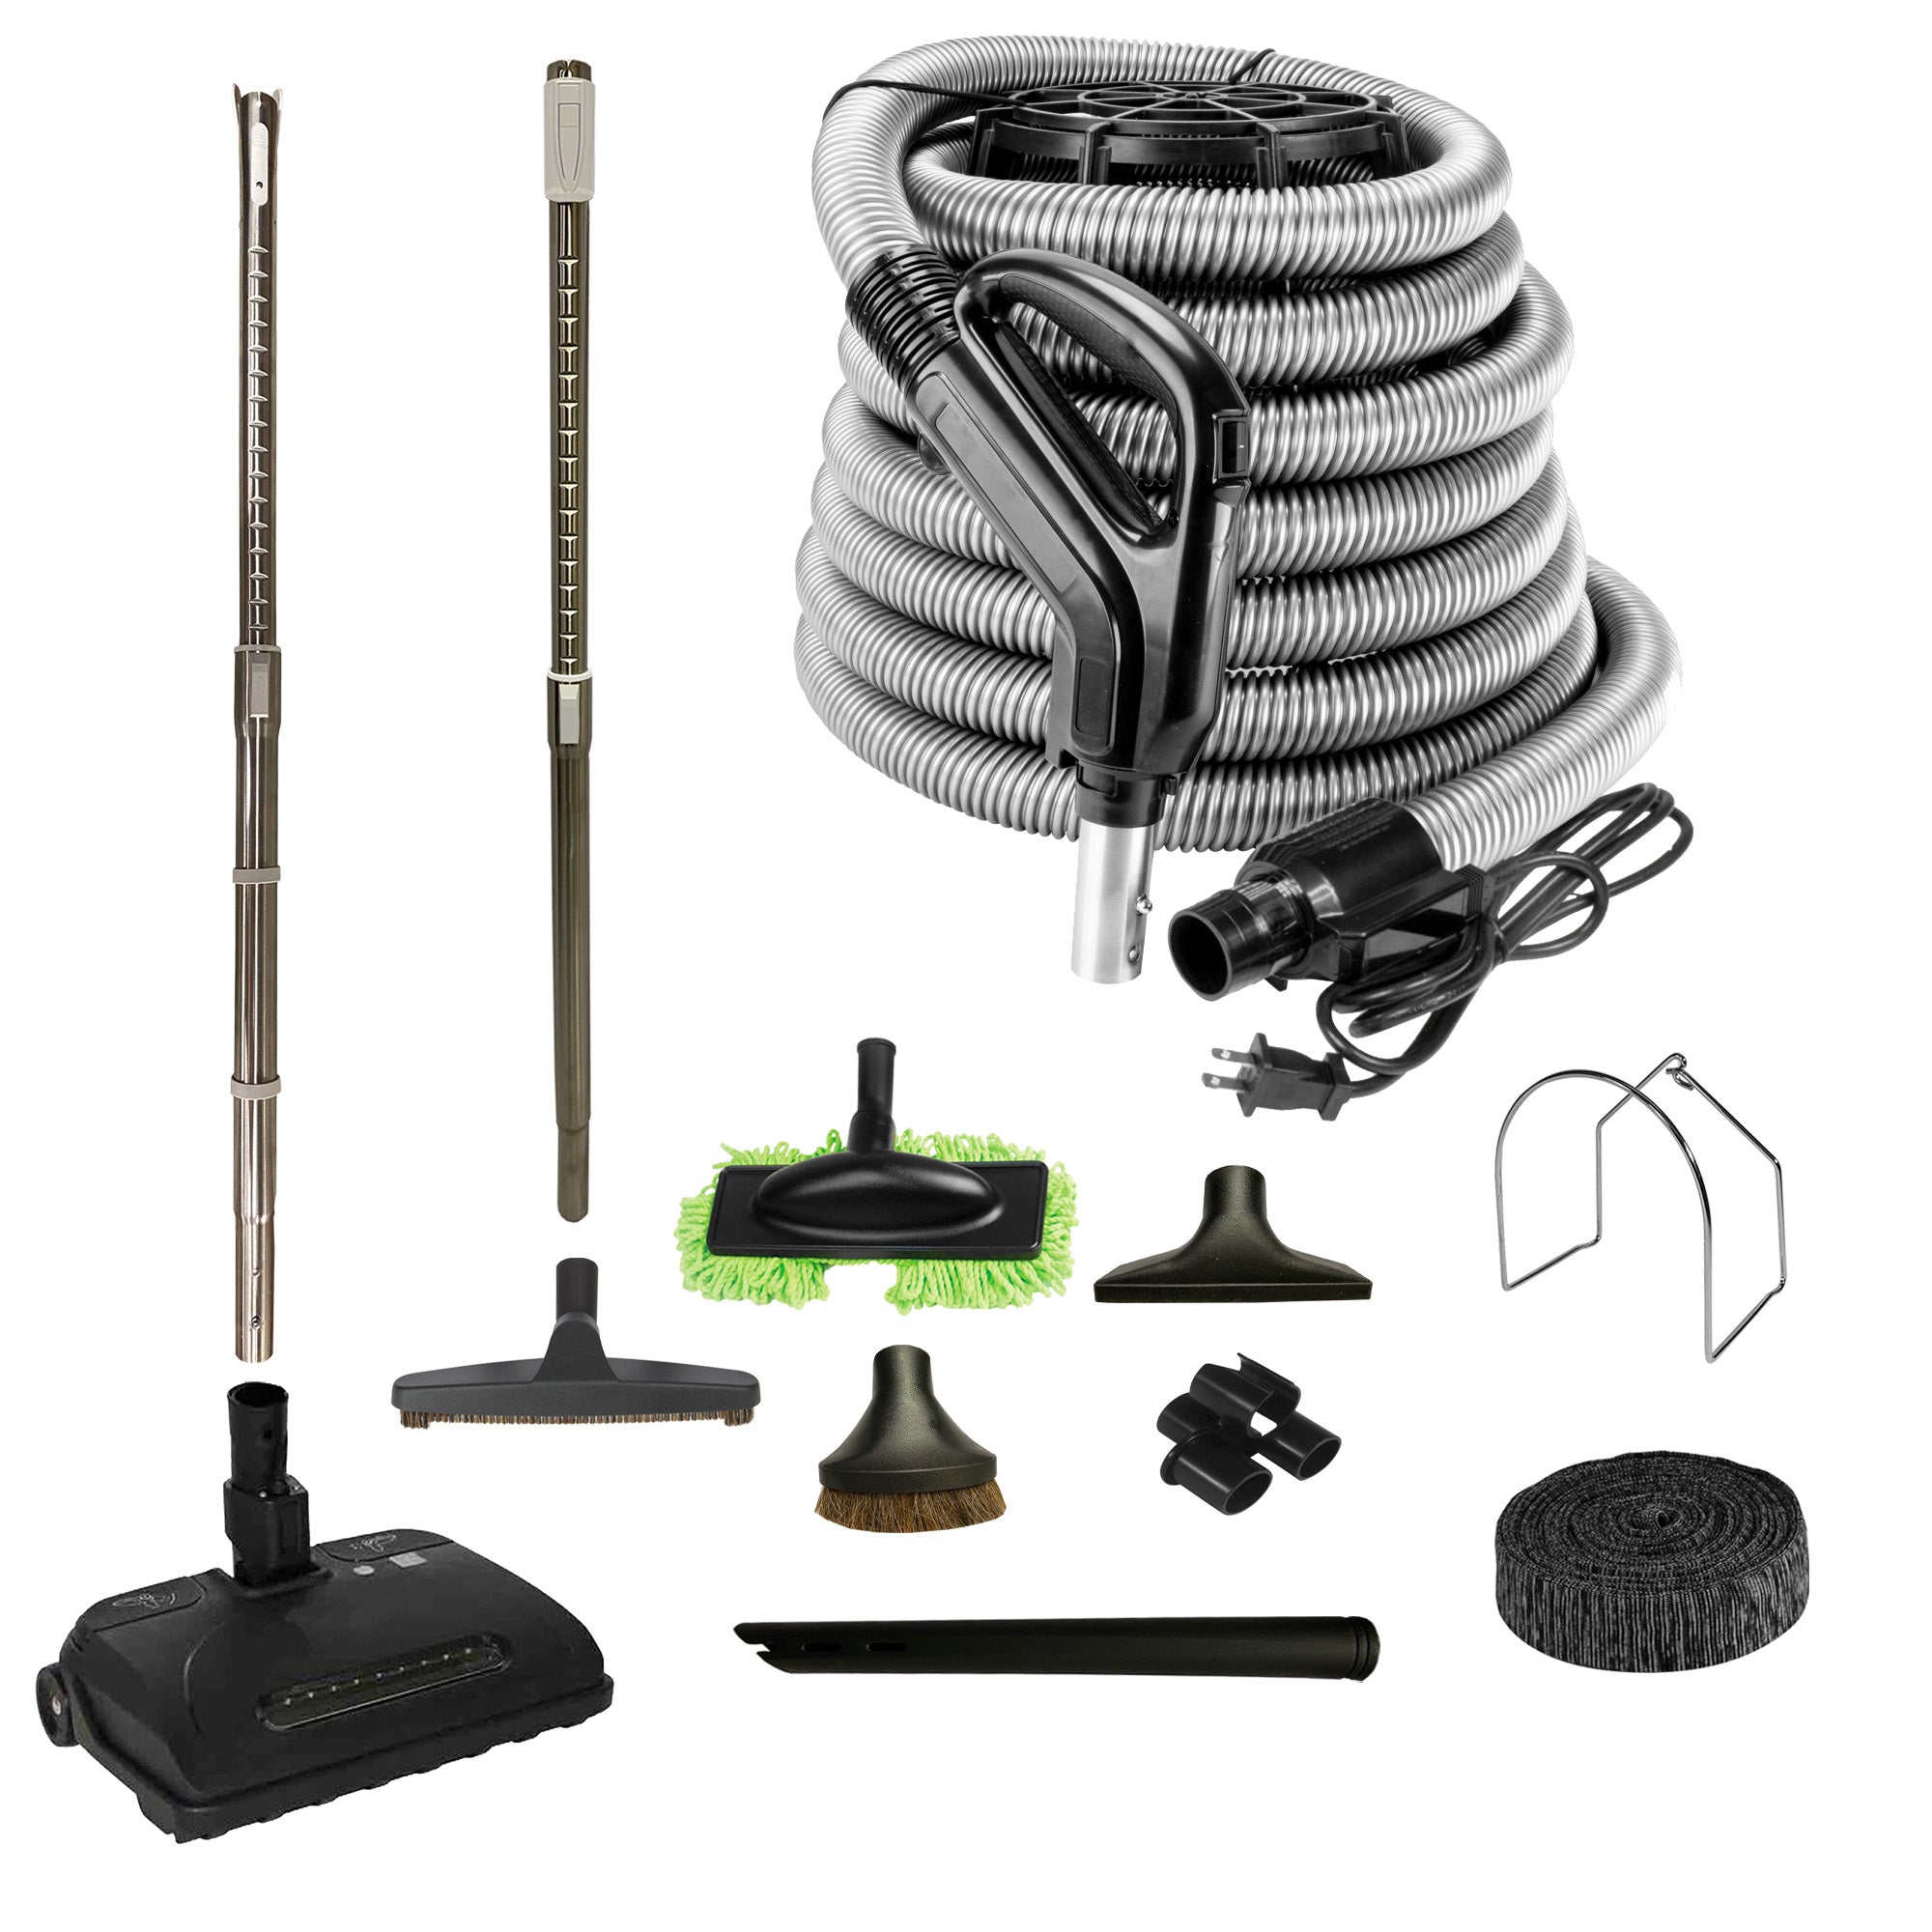 VPC Central Vacuum Accessory Kit with Telescopic Wand and Bonus Tools - Black